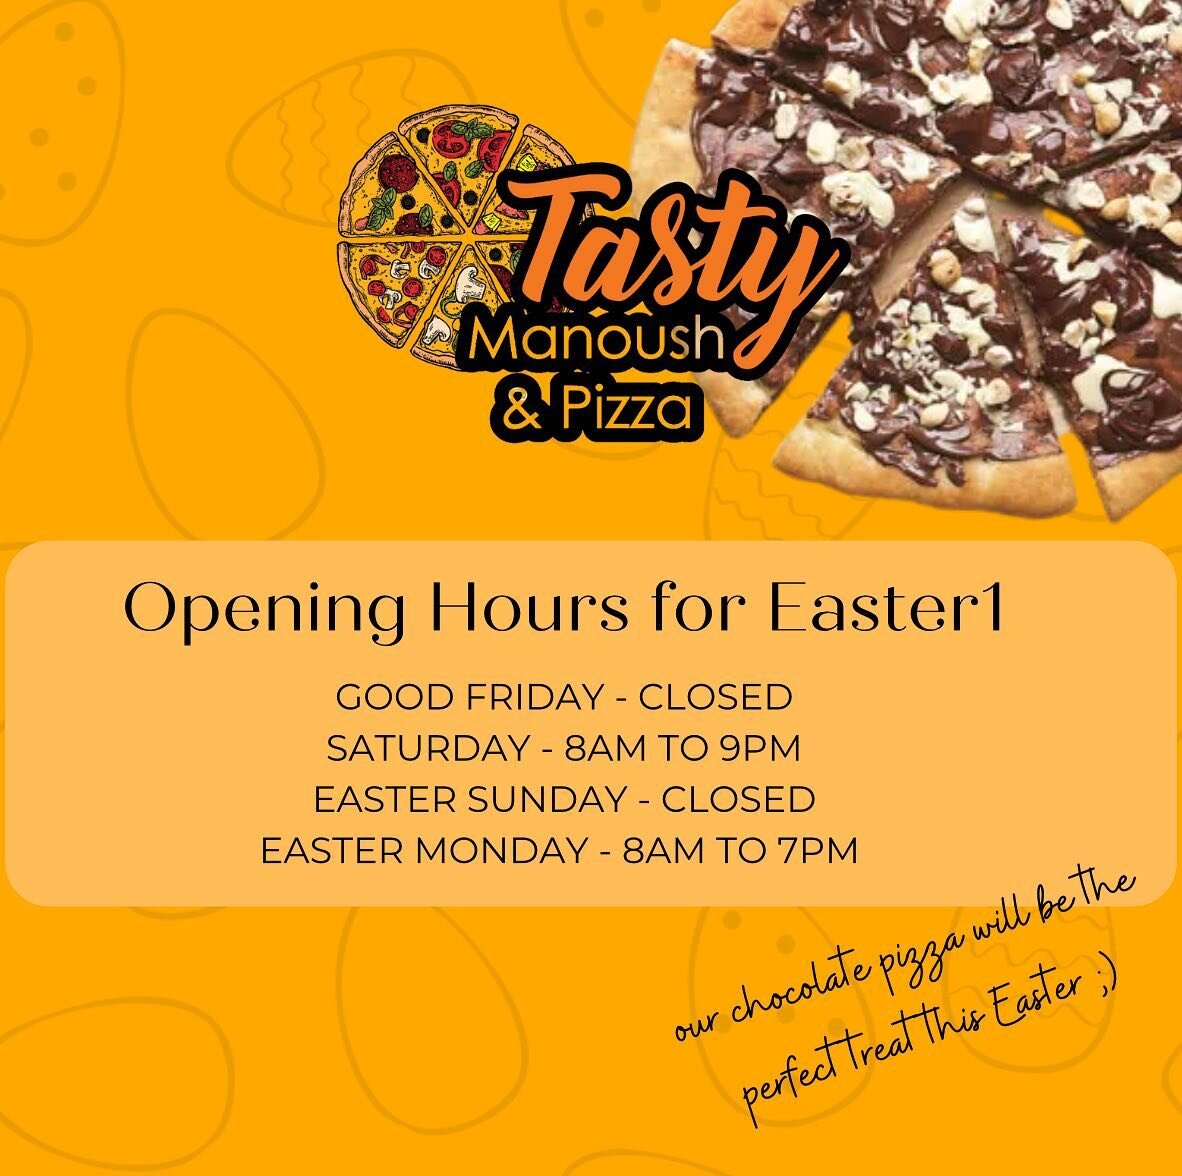 HAPPY EASTER 🥚 
Here&rsquo;s our operating hours during the Easter break 🐣 
P.s. our Nutella Pizza will be the perfect treat this Easter 🍫🙃
.
.
.
#eastershow #easter #nutellapizza #chocolatepizza #easterholiday #pizzalover #dessertlover #dessertl